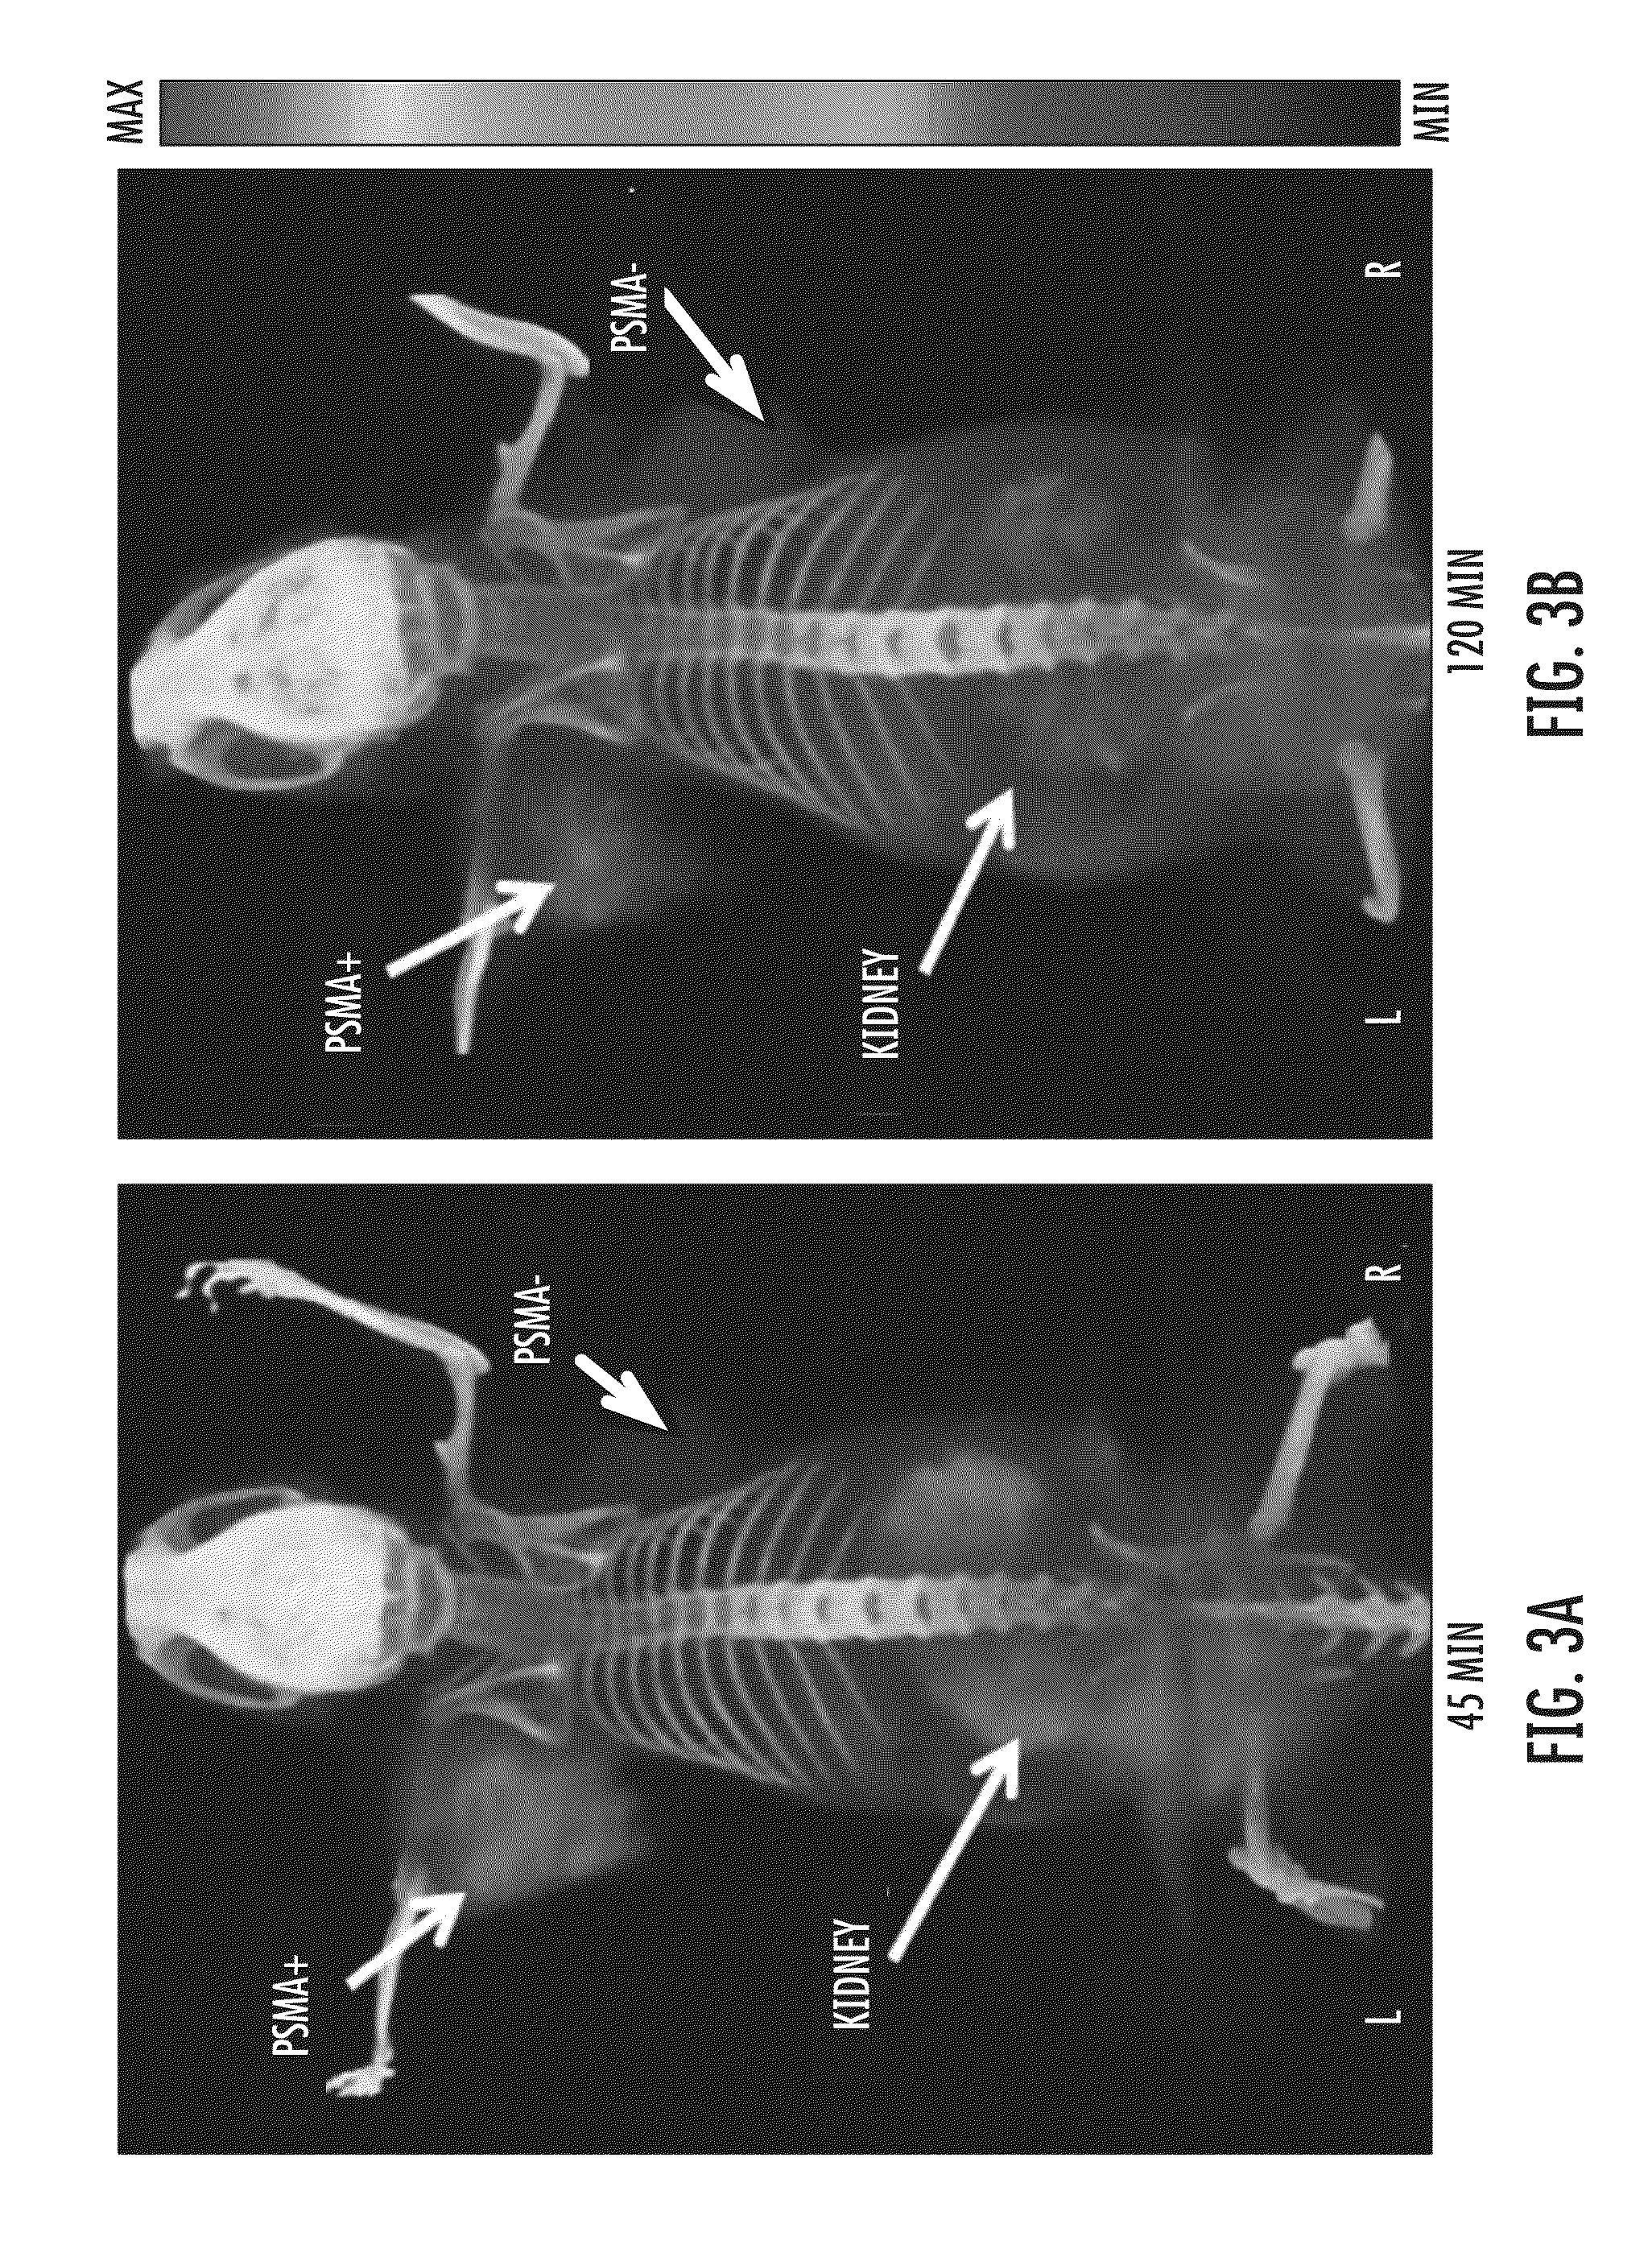 Psma-targeting compounds and uses thereof